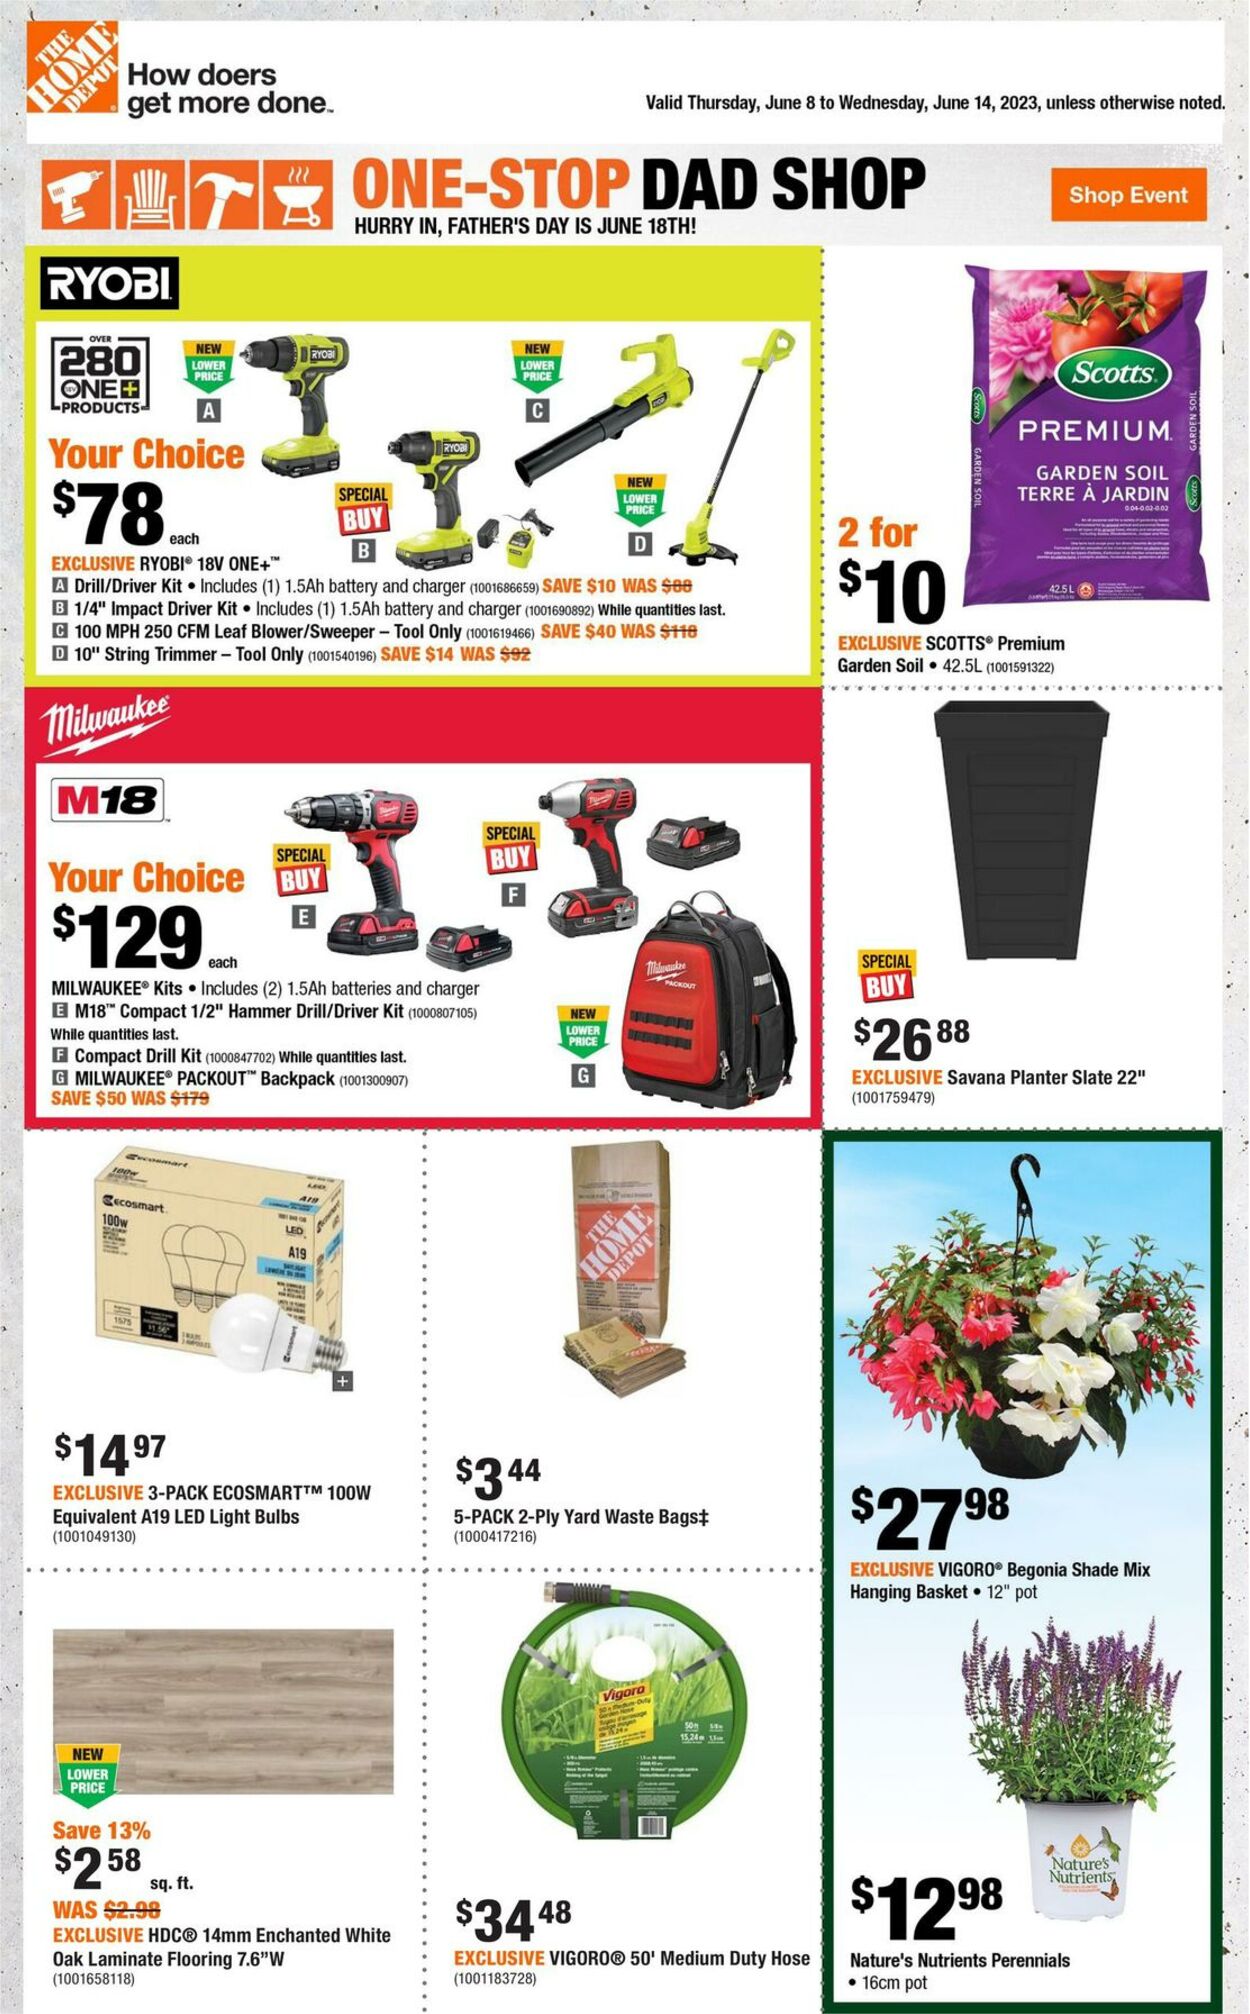 Home Depot Promotional Flyer Father's Day Valid from 08.06 to 14.06